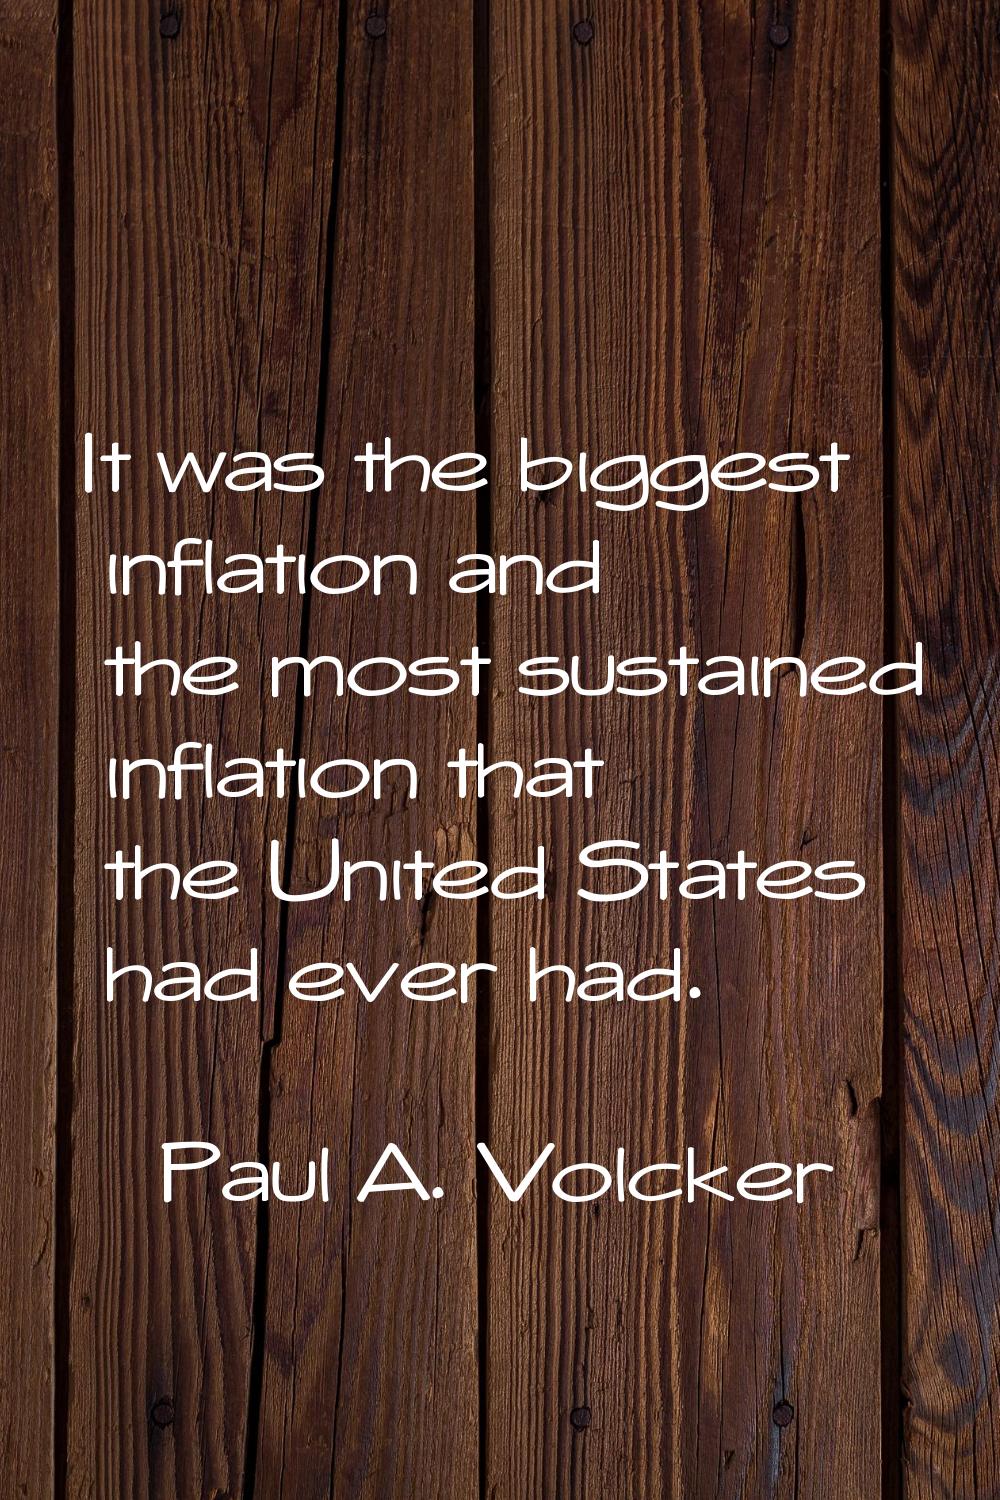 It was the biggest inflation and the most sustained inflation that the United States had ever had.